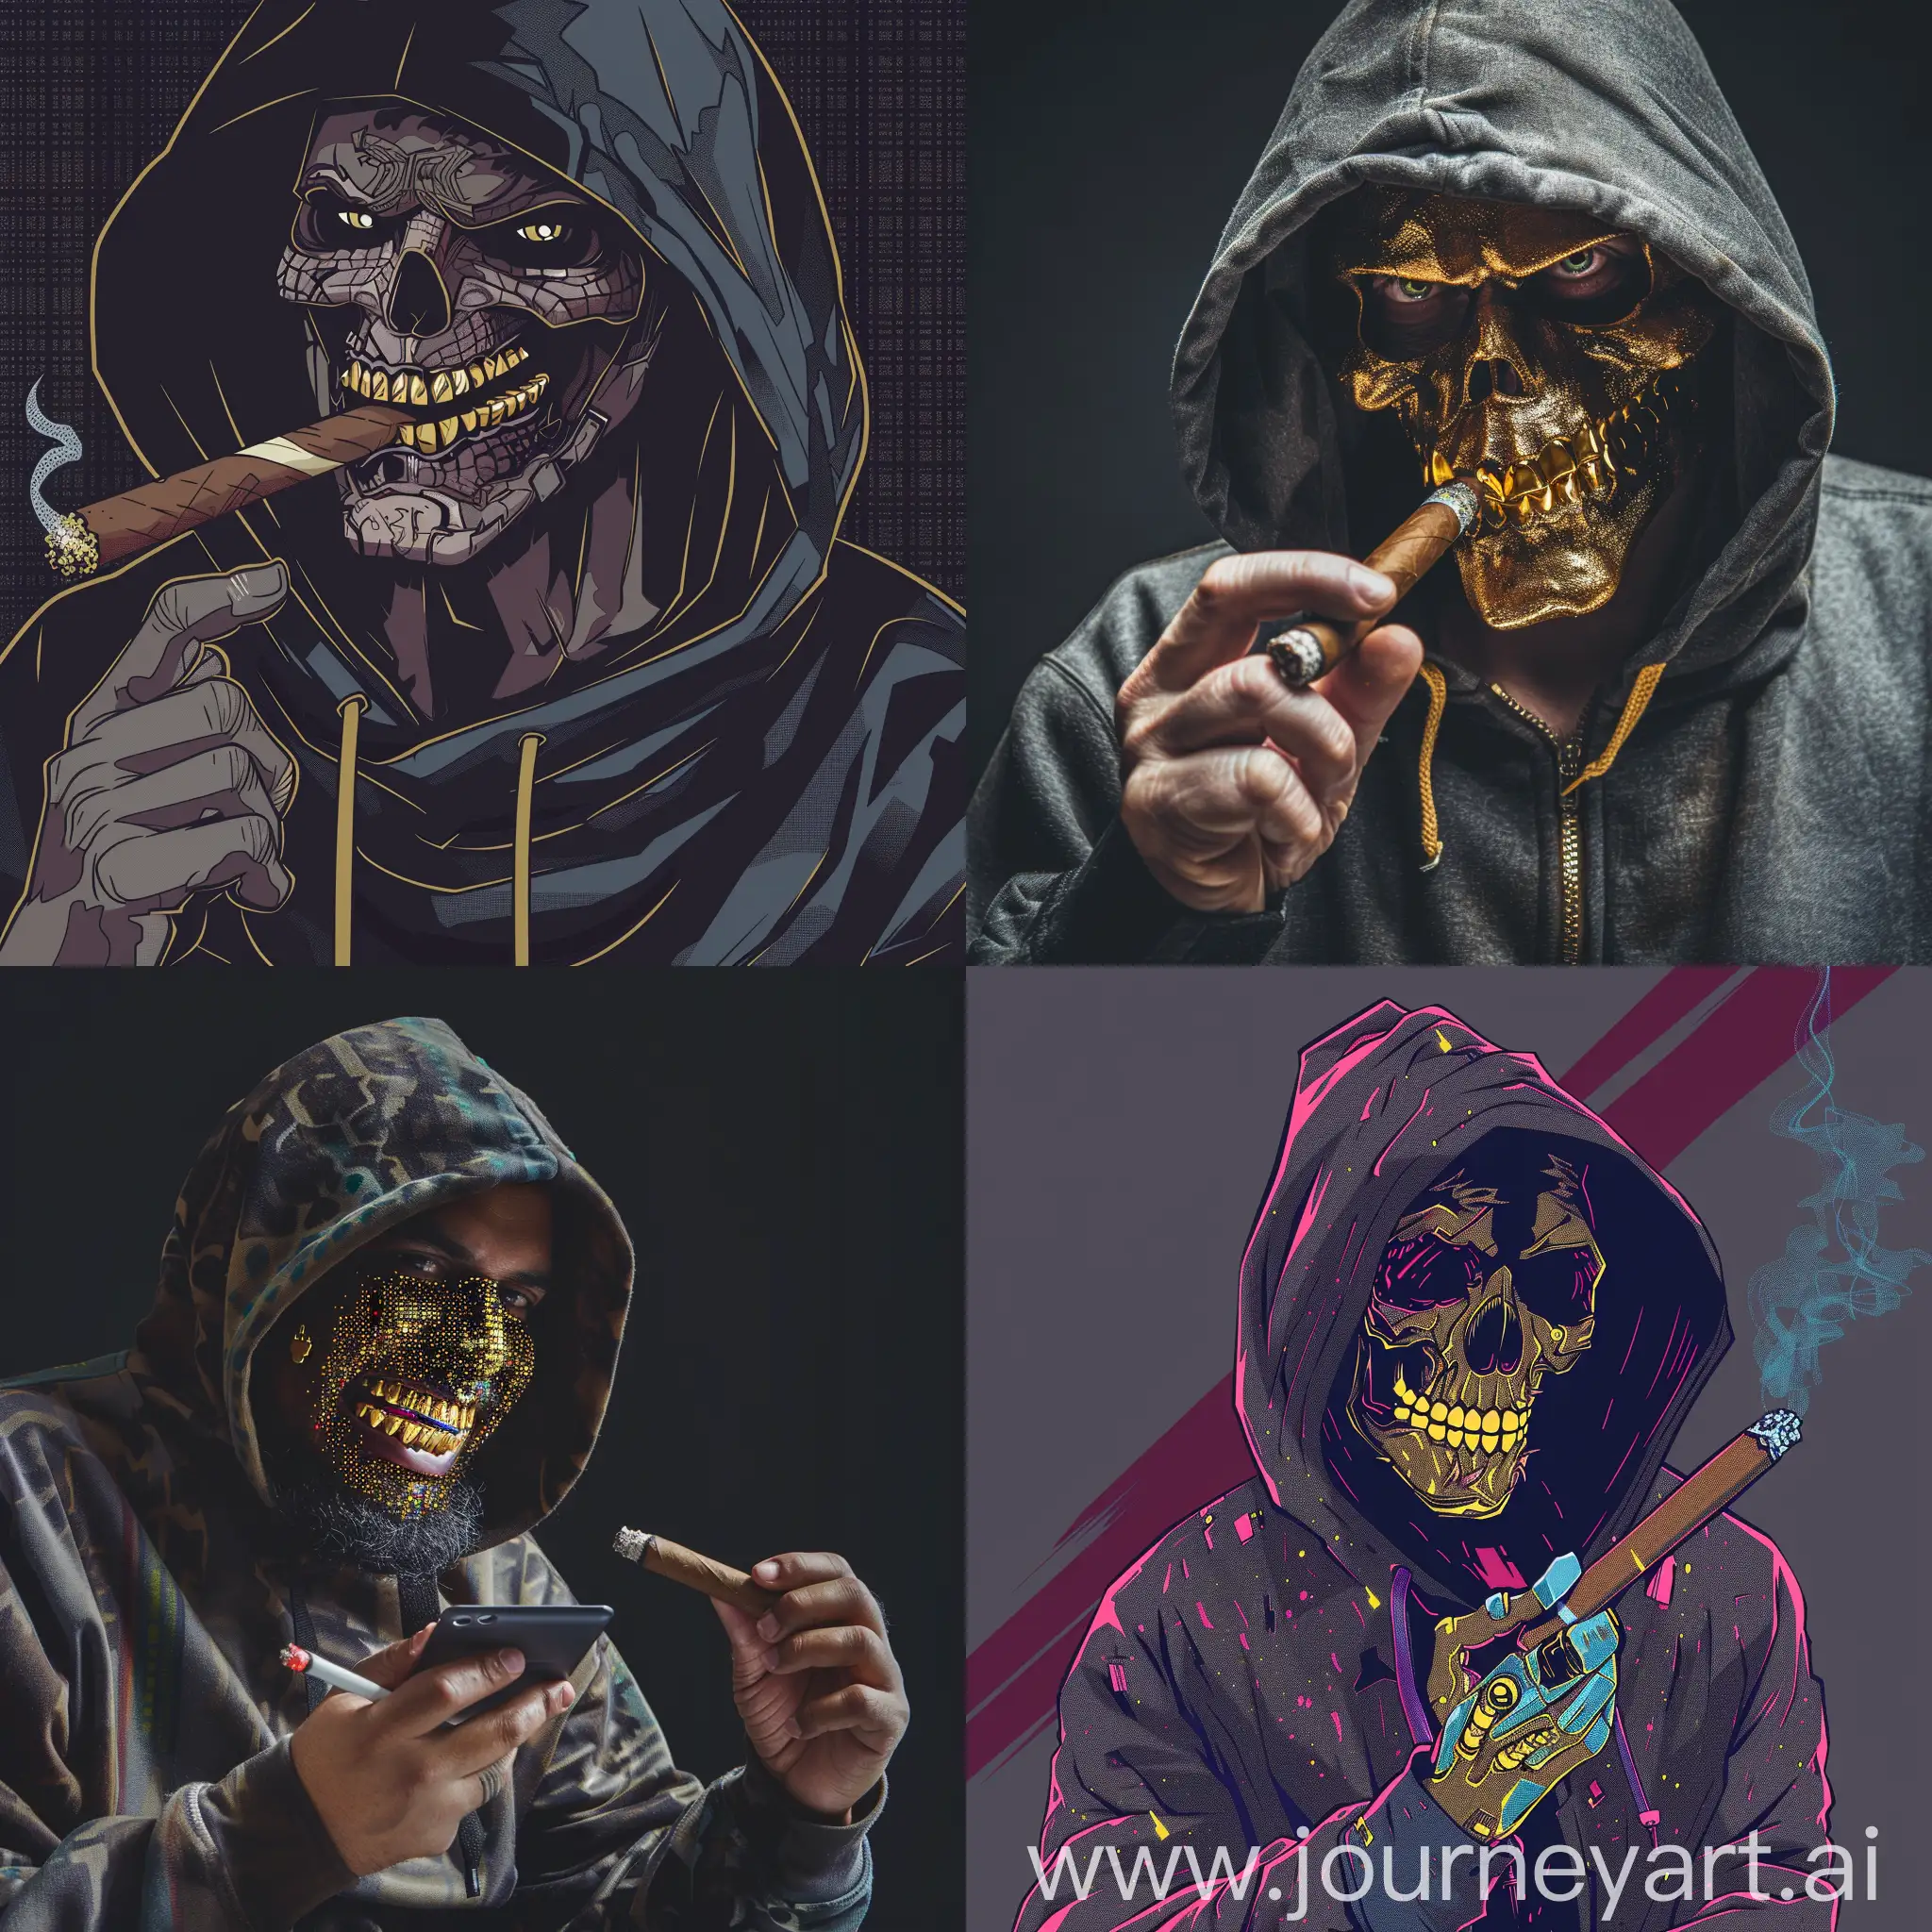 hacker wearing a hoodie with a gold teeth and holding cigar, with a hacking theme